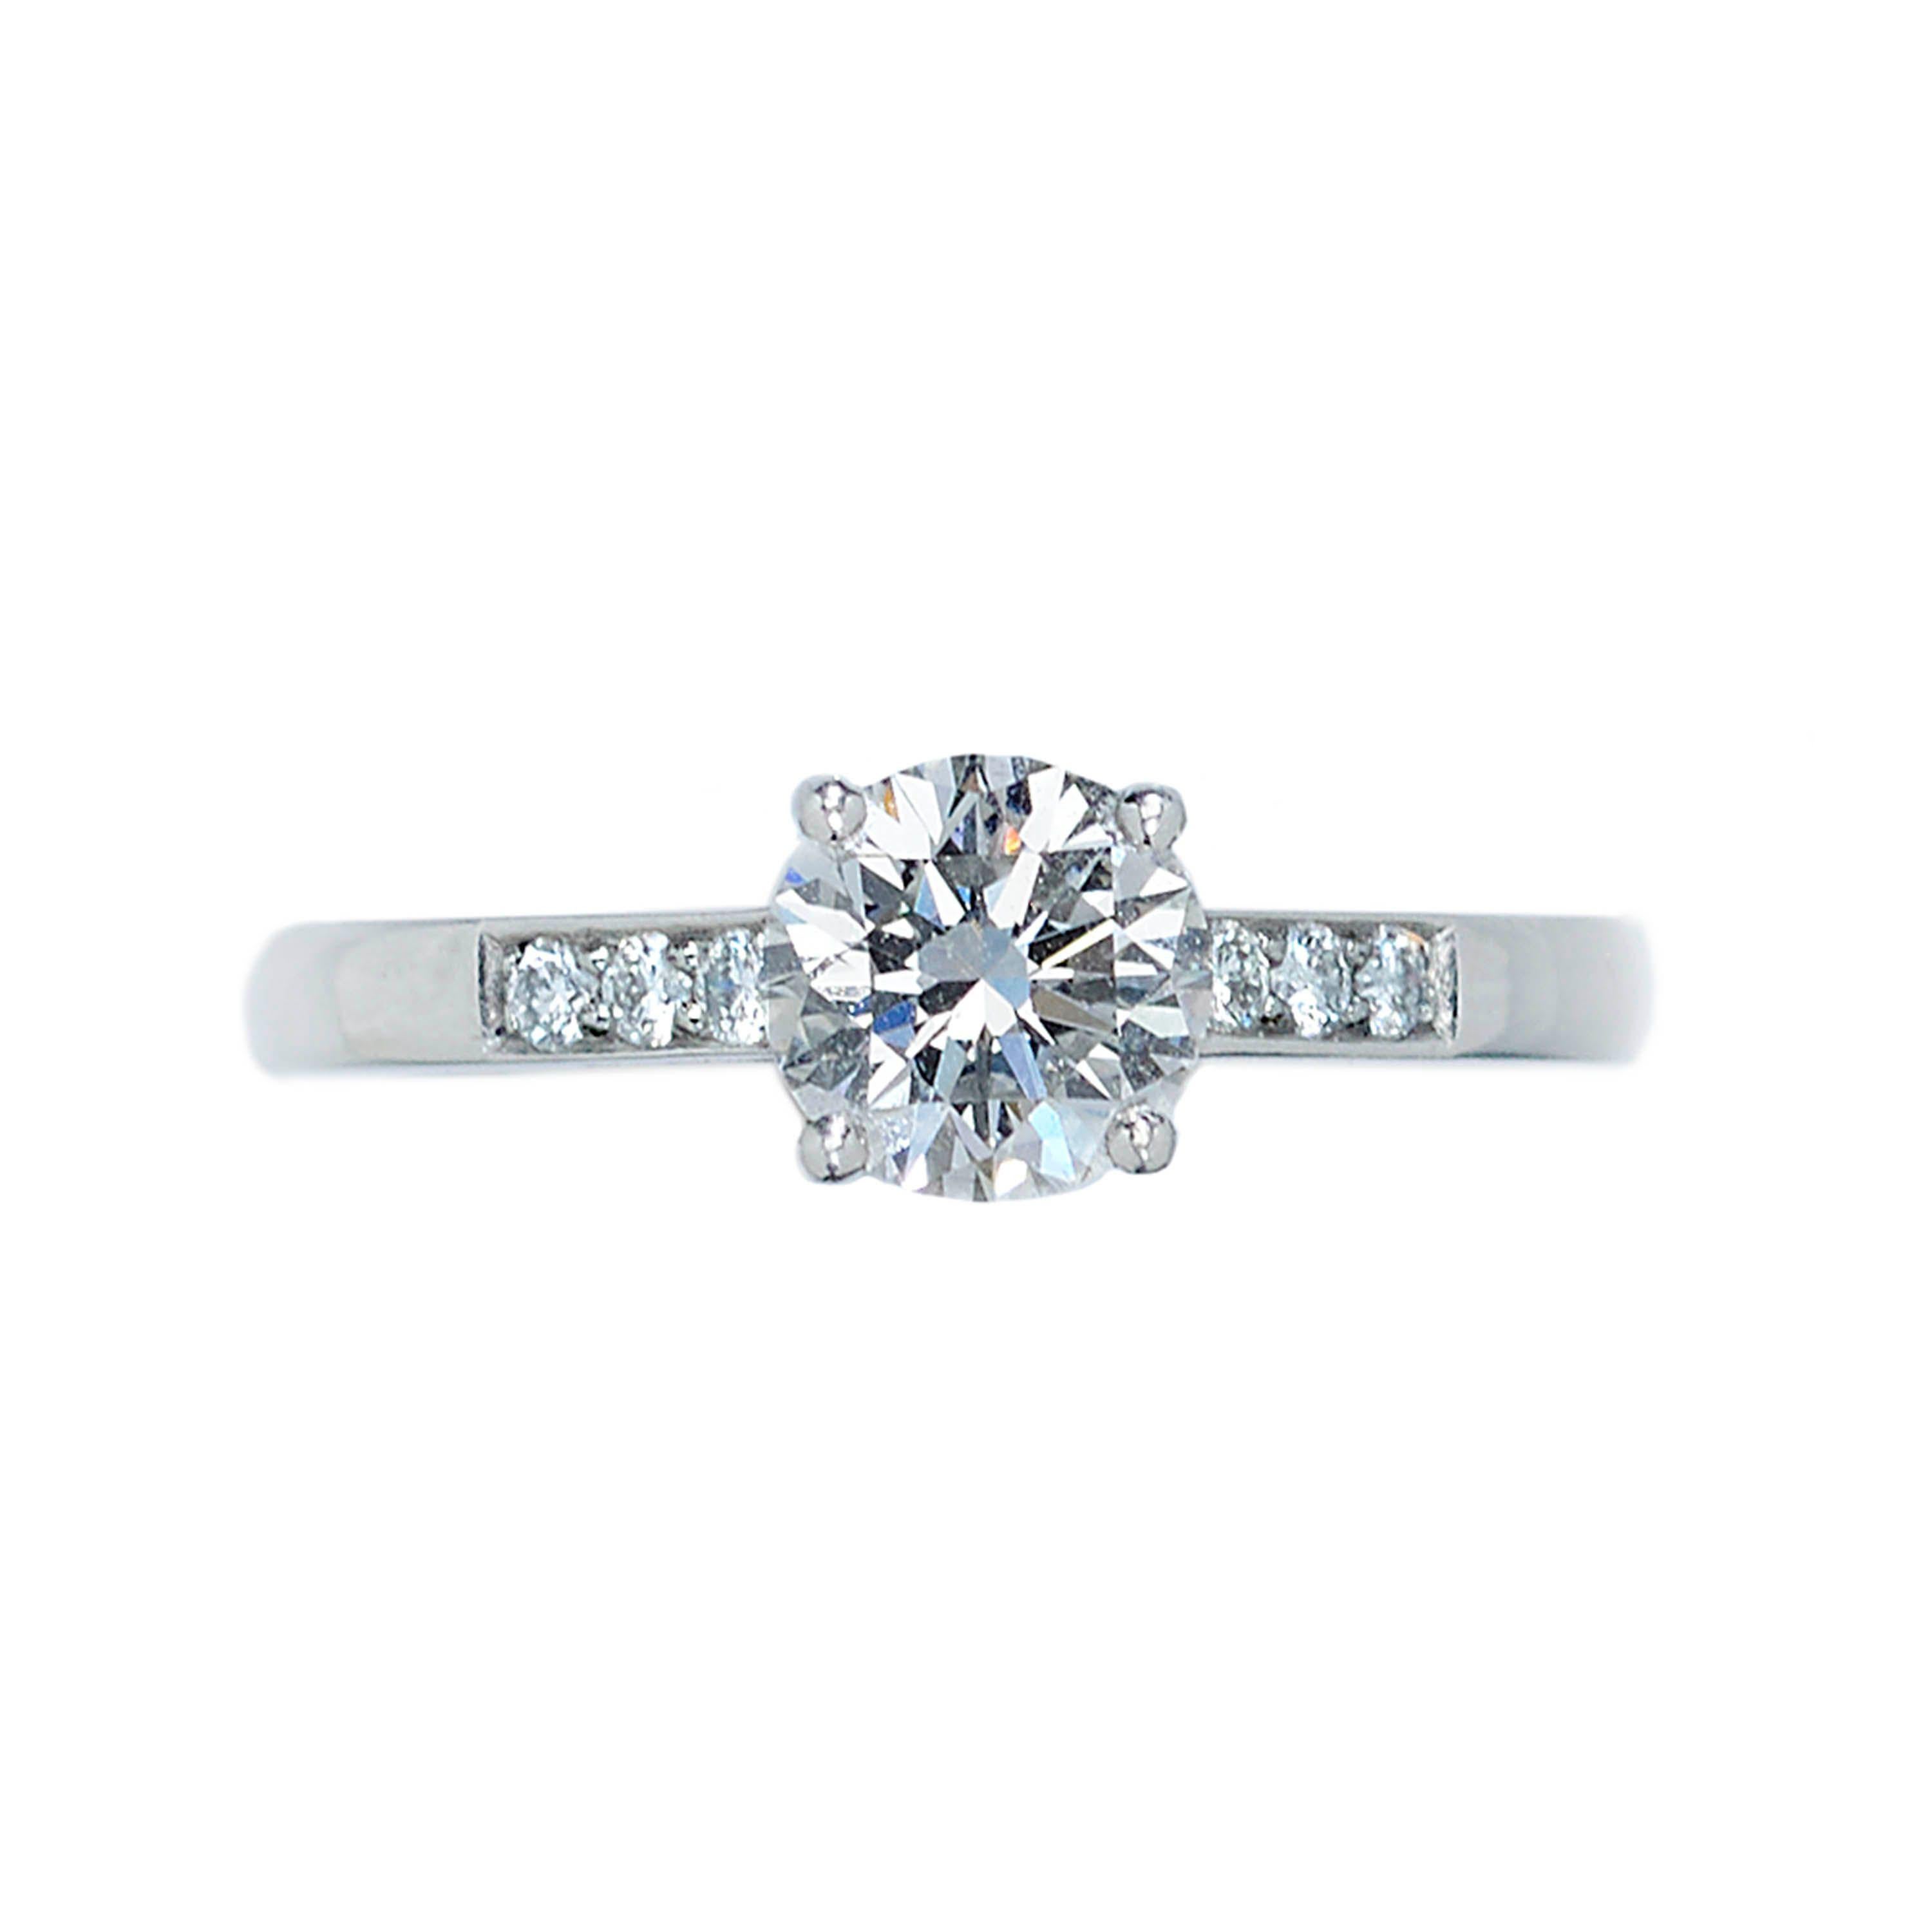 A diamond solitaire ring, set with a 1.04ct, F colour, VS1 clarity, round brilliant-cut diamond, in a four claw setting, with three round brilliant-cut diamonds pavé set in each shoulder, with a total weight of 0.11ct, mounted in platinum,